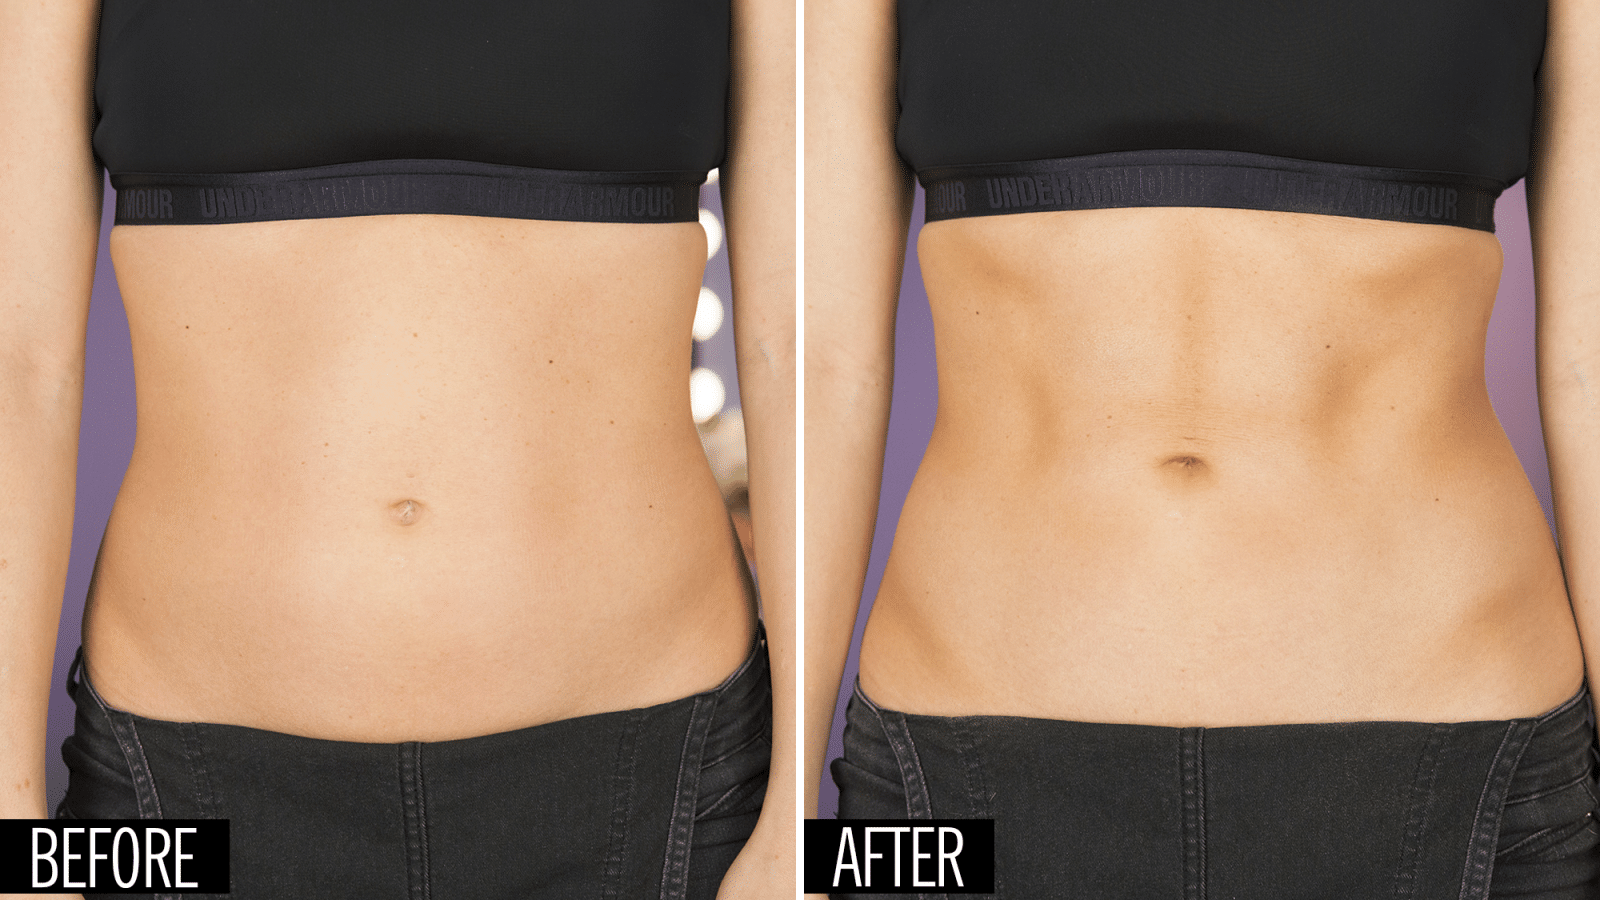 Go-Ultra Fat Reduction - Before and After Results